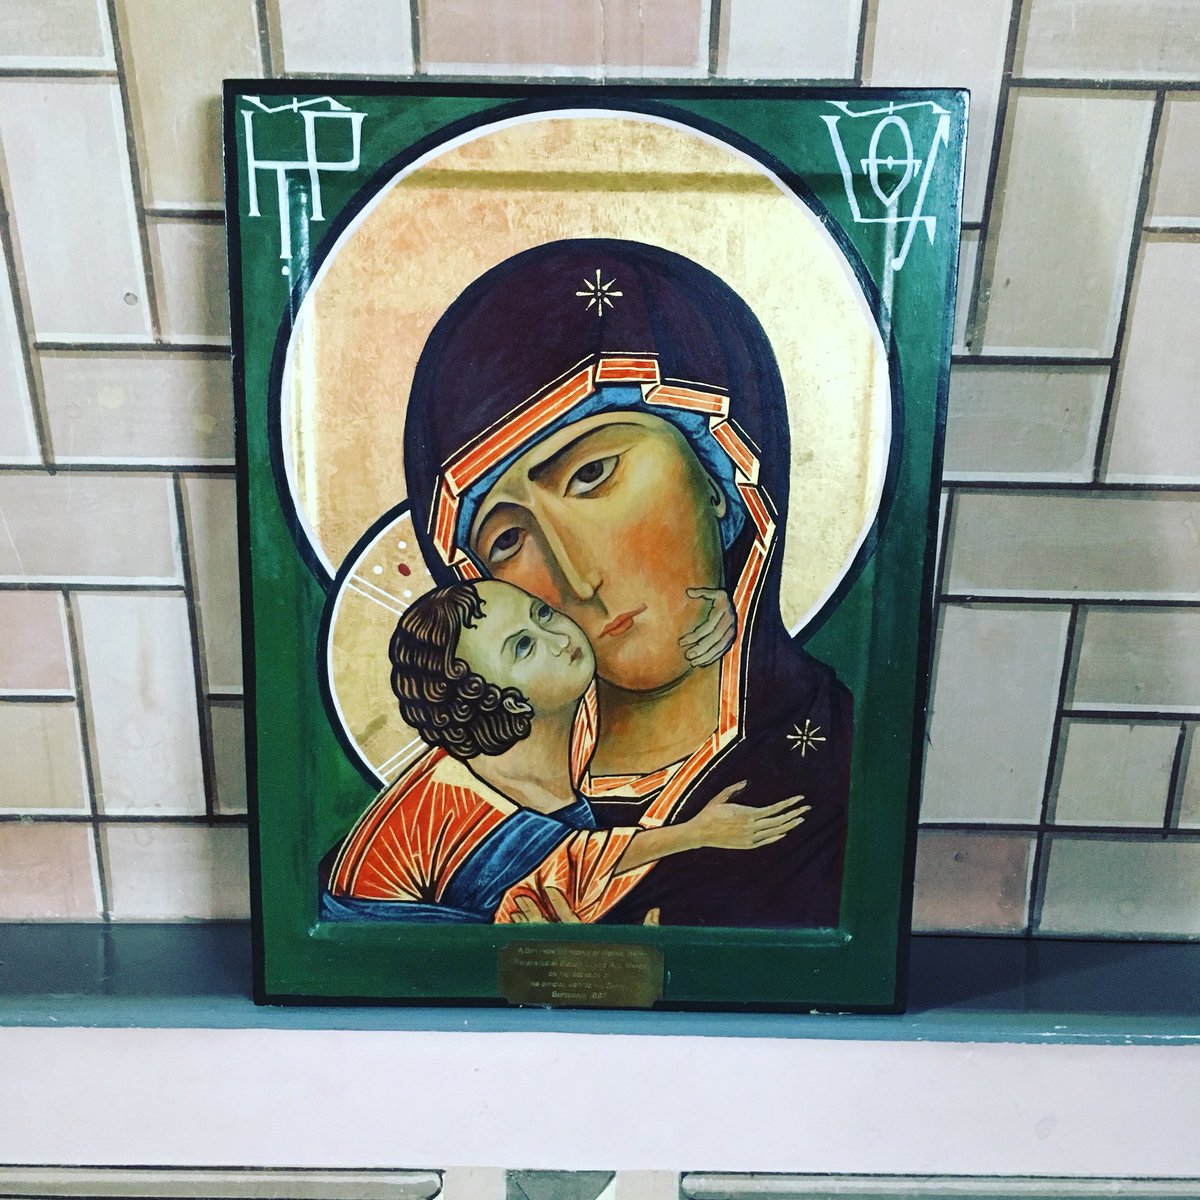 Today’s #islandmemory is an #icon from inside the #italianchapel in #orkney The whole place was made from junk and rubbish by the #Italian POWs during WW2. Quite remarkable. #orkneyisles #northernisles #islands #scottishislands #scotland